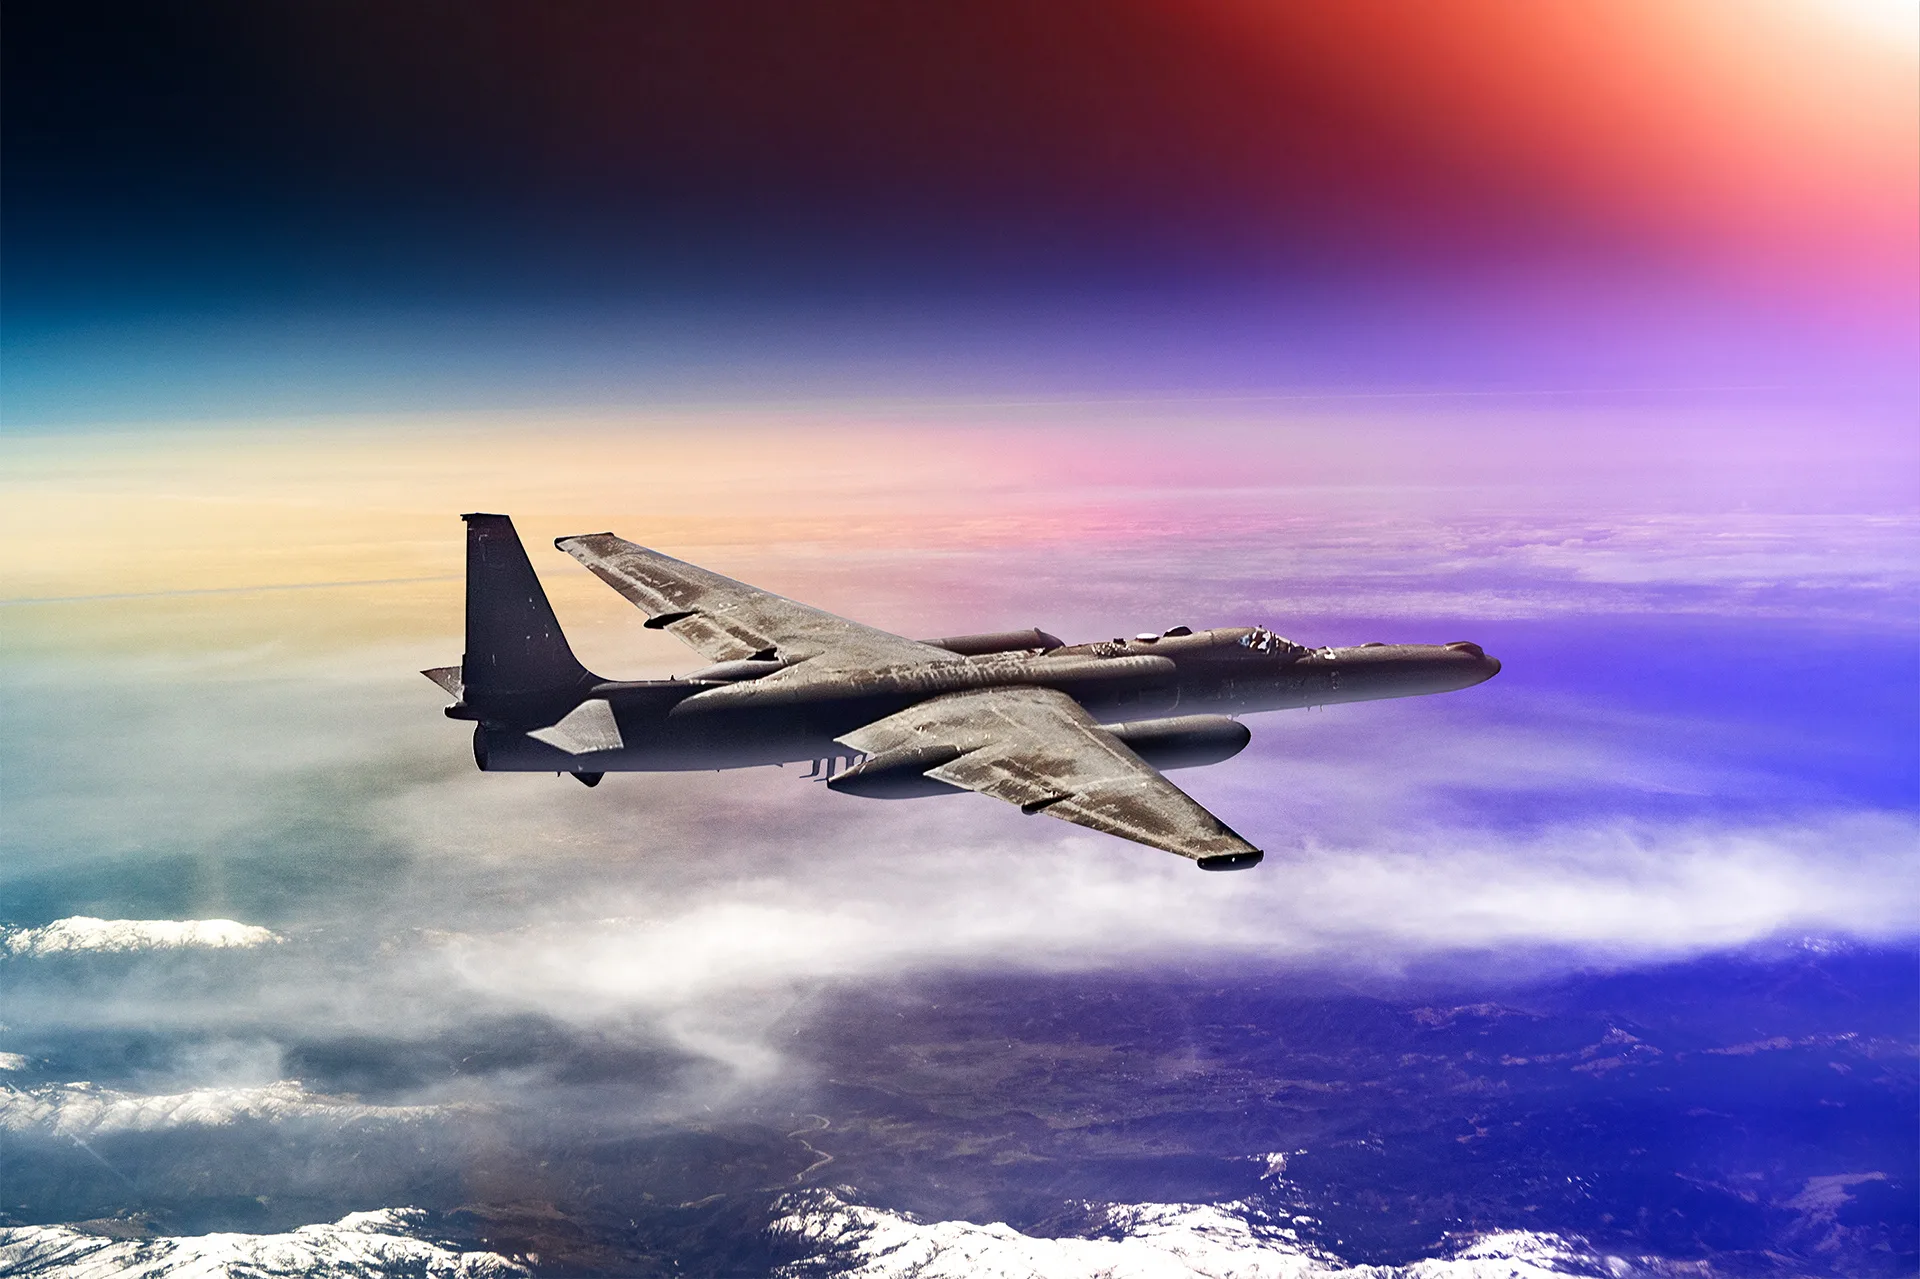 A U2 Dragon Lady spy plane photographed by Commercial Photographer Blair Bunting. The image is part of the series "Photoshoot at the Edge of Space," in which Bunting did a photoshoot above 70,000 feet while in a spacesuit.